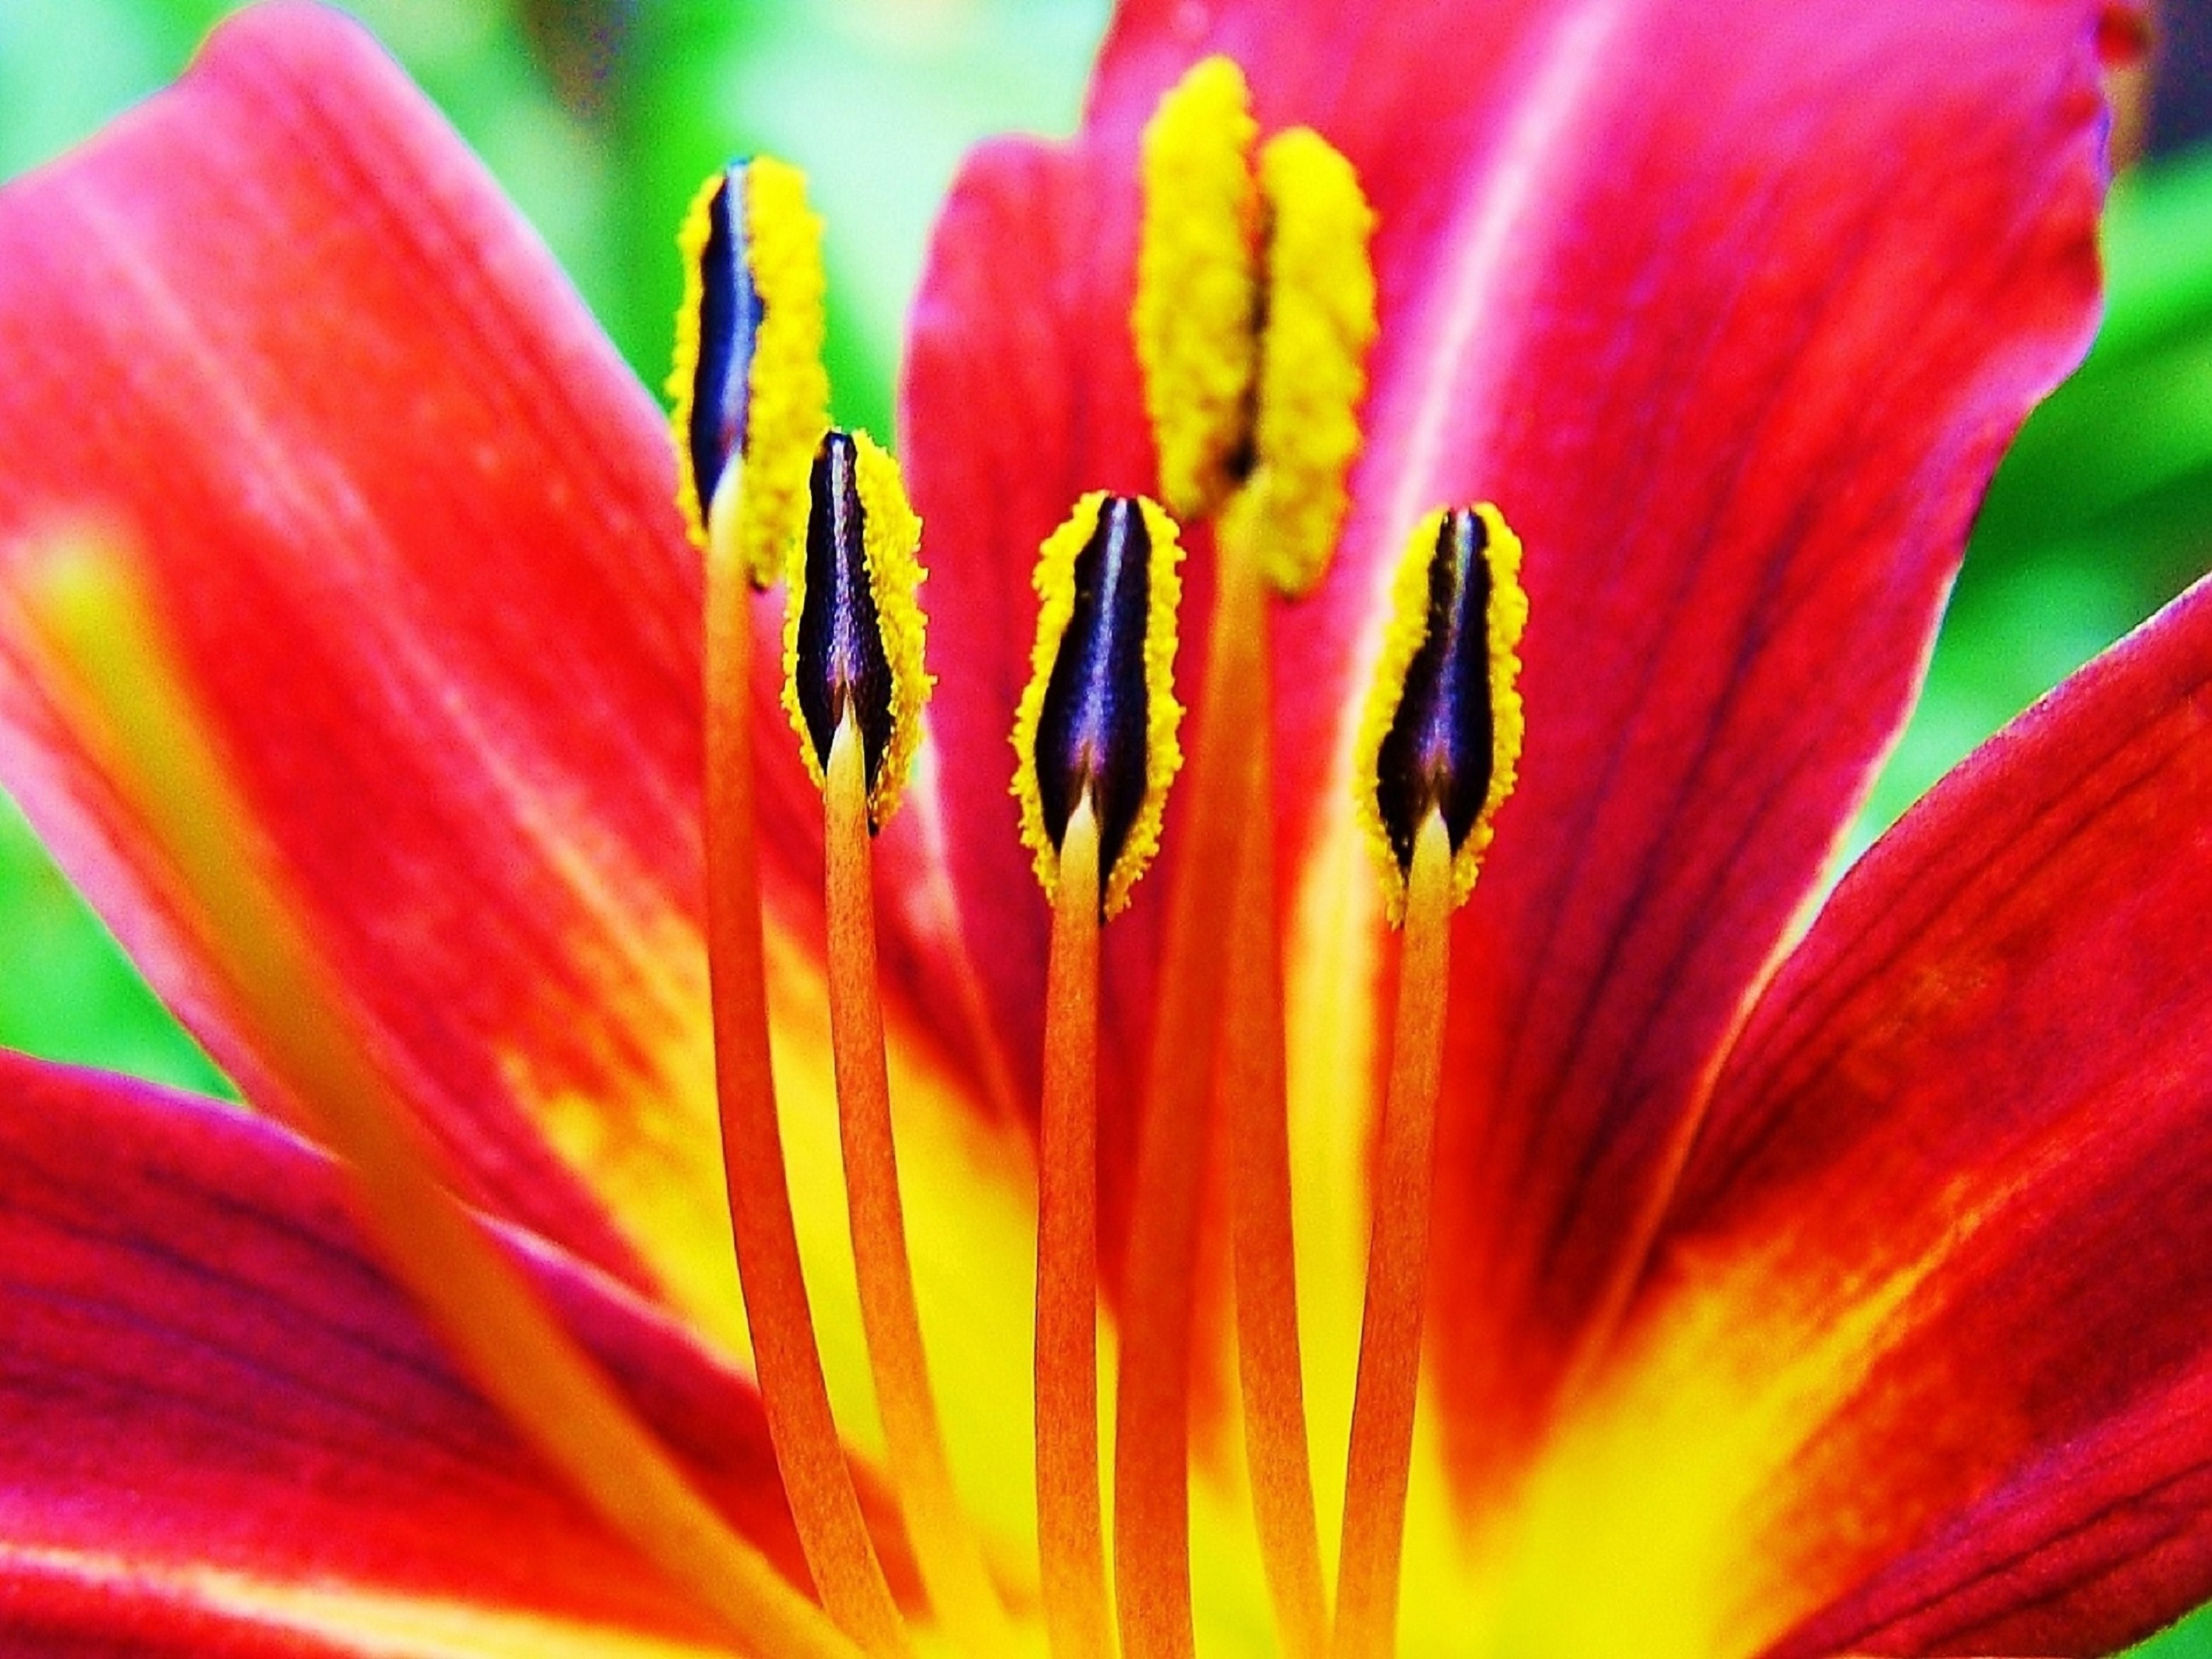 red and yellow petaled flower with yellow-and-black stigmas